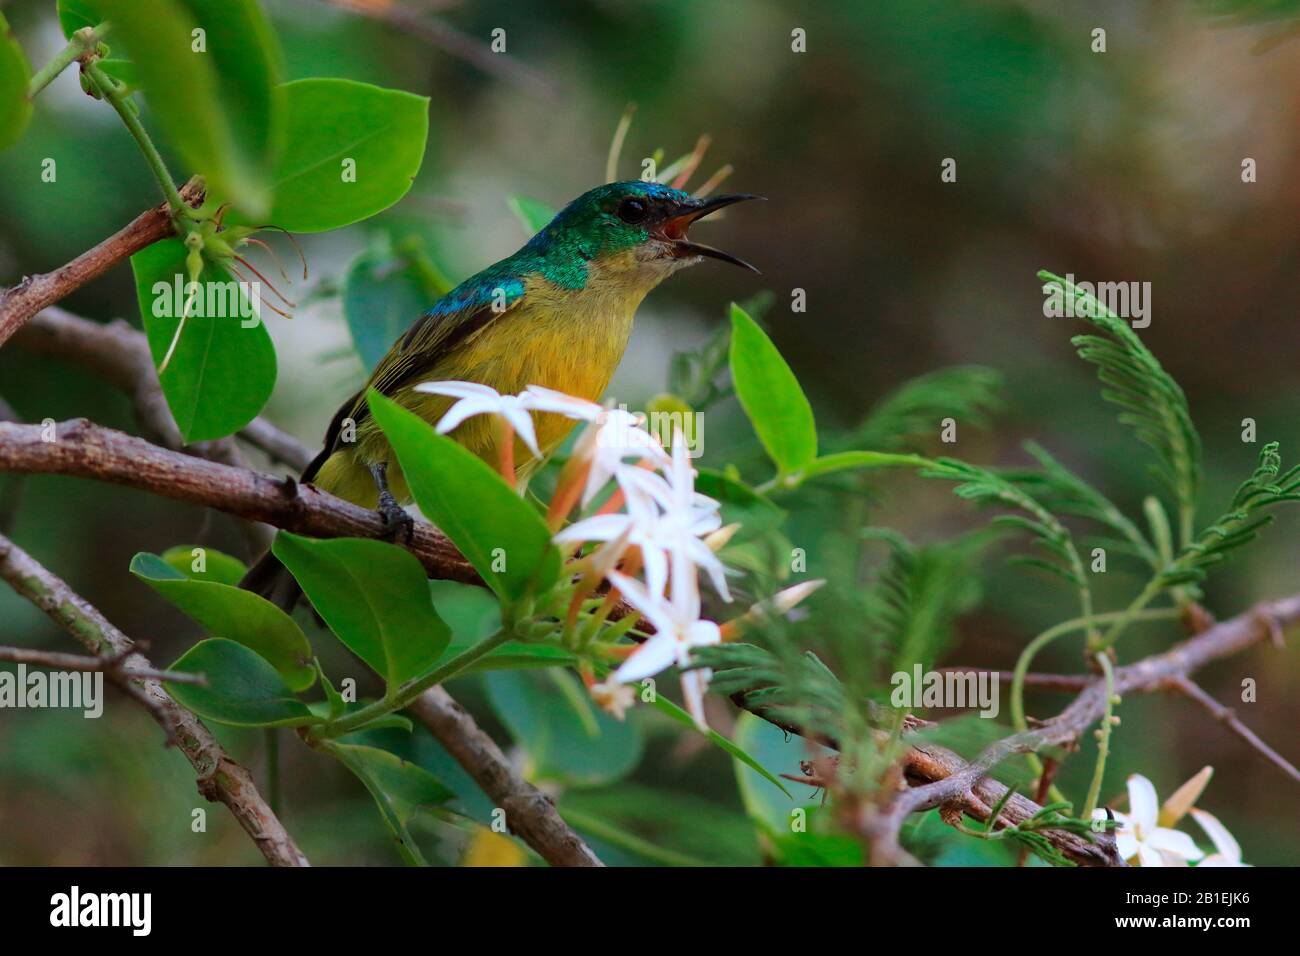 Collared sunbird, (Hedydipna collaris) on a branch Stock Photo